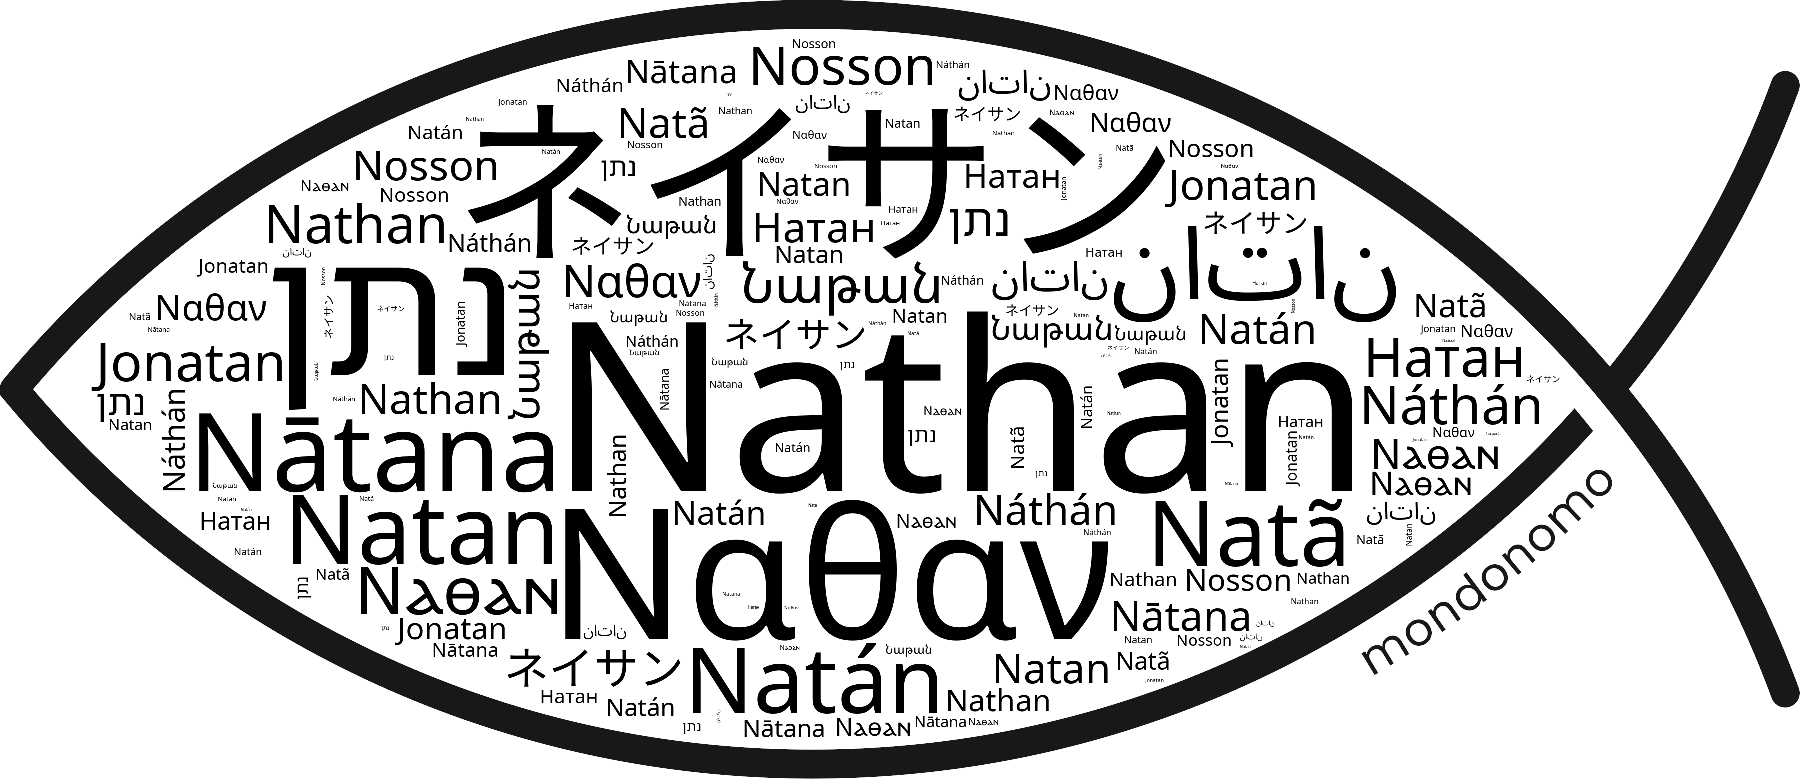 Name Nathan in the world's Bibles